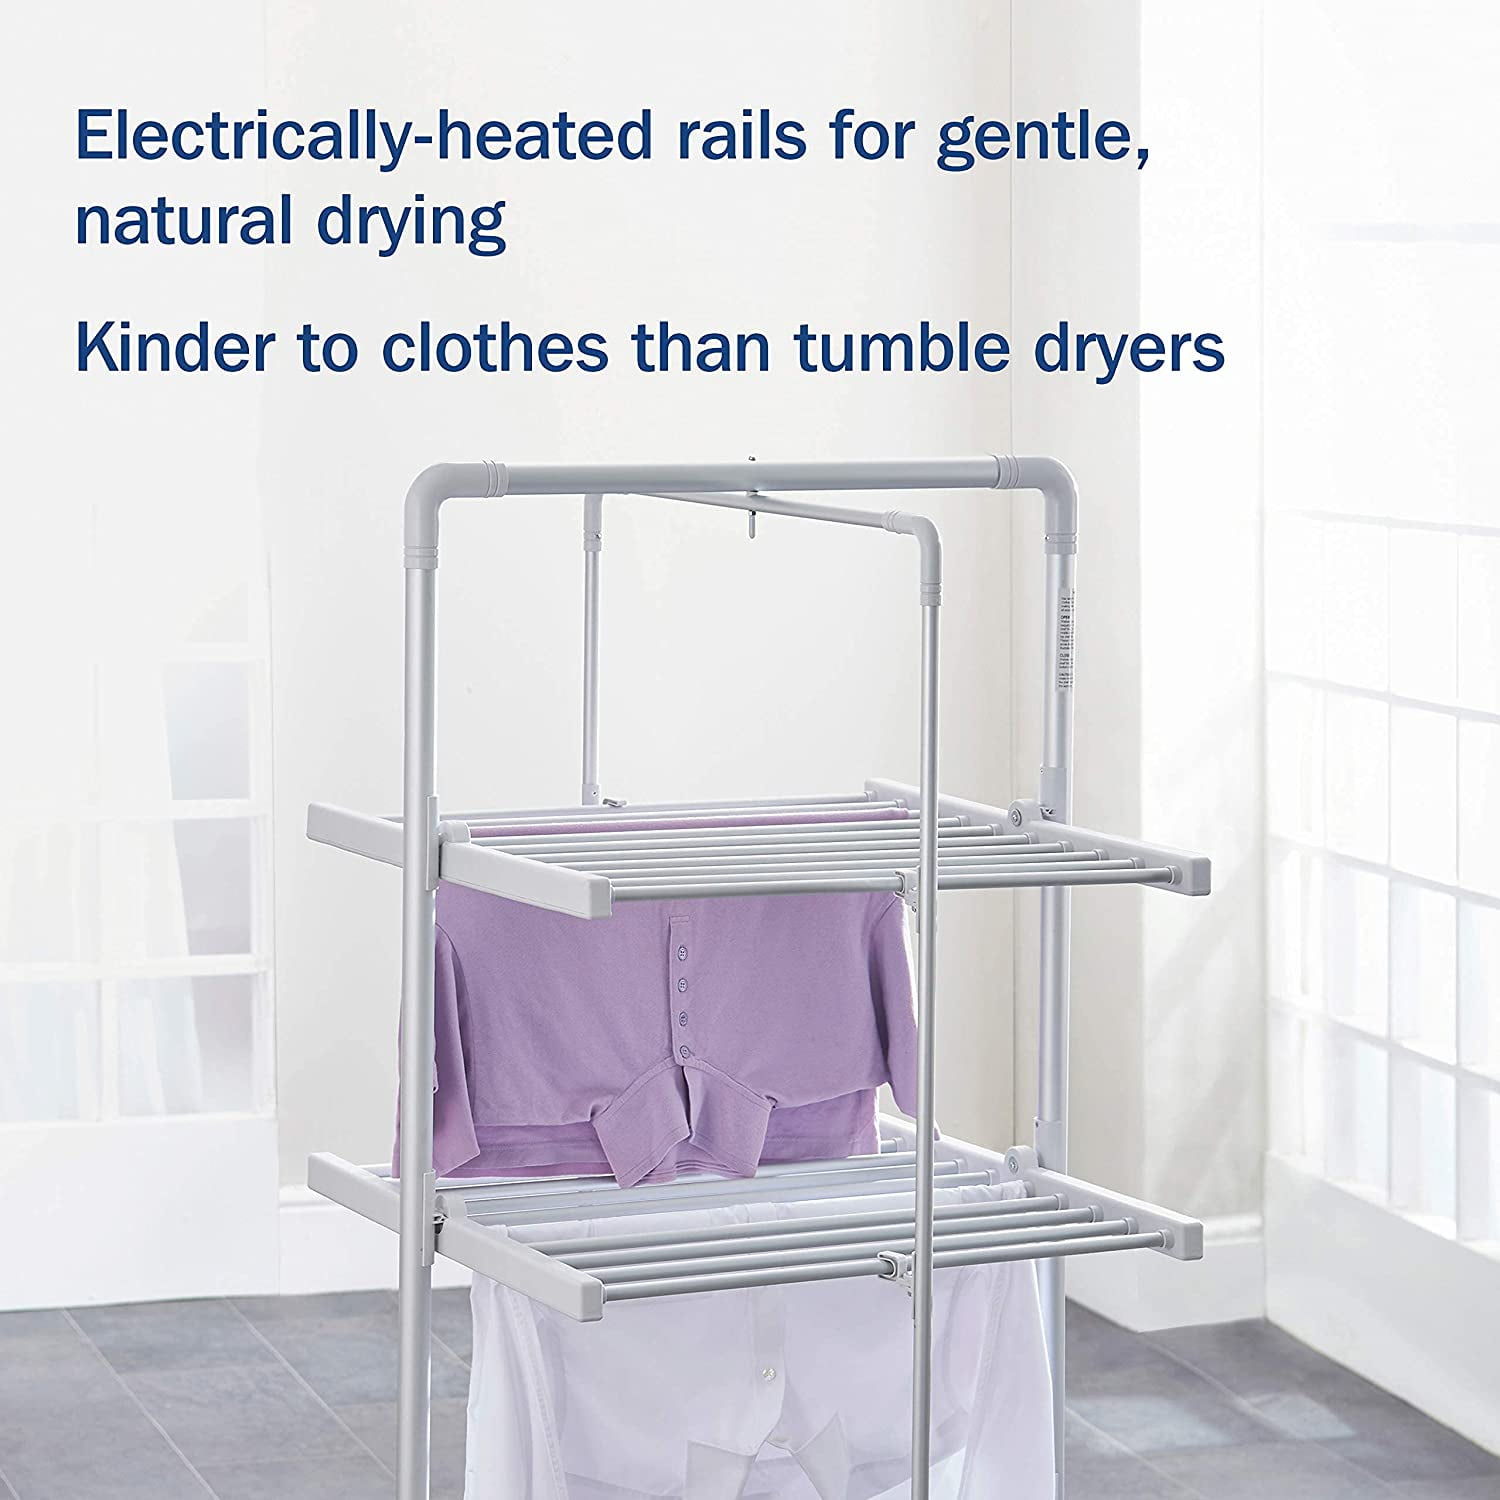 Easylife XL Heated Drying Rack with Timer, 3 Tier Airer, Warming Clothes  Dryer, Electric Clothes Horse, Laundry Rack h57.8 x w28.3 x d26.4 